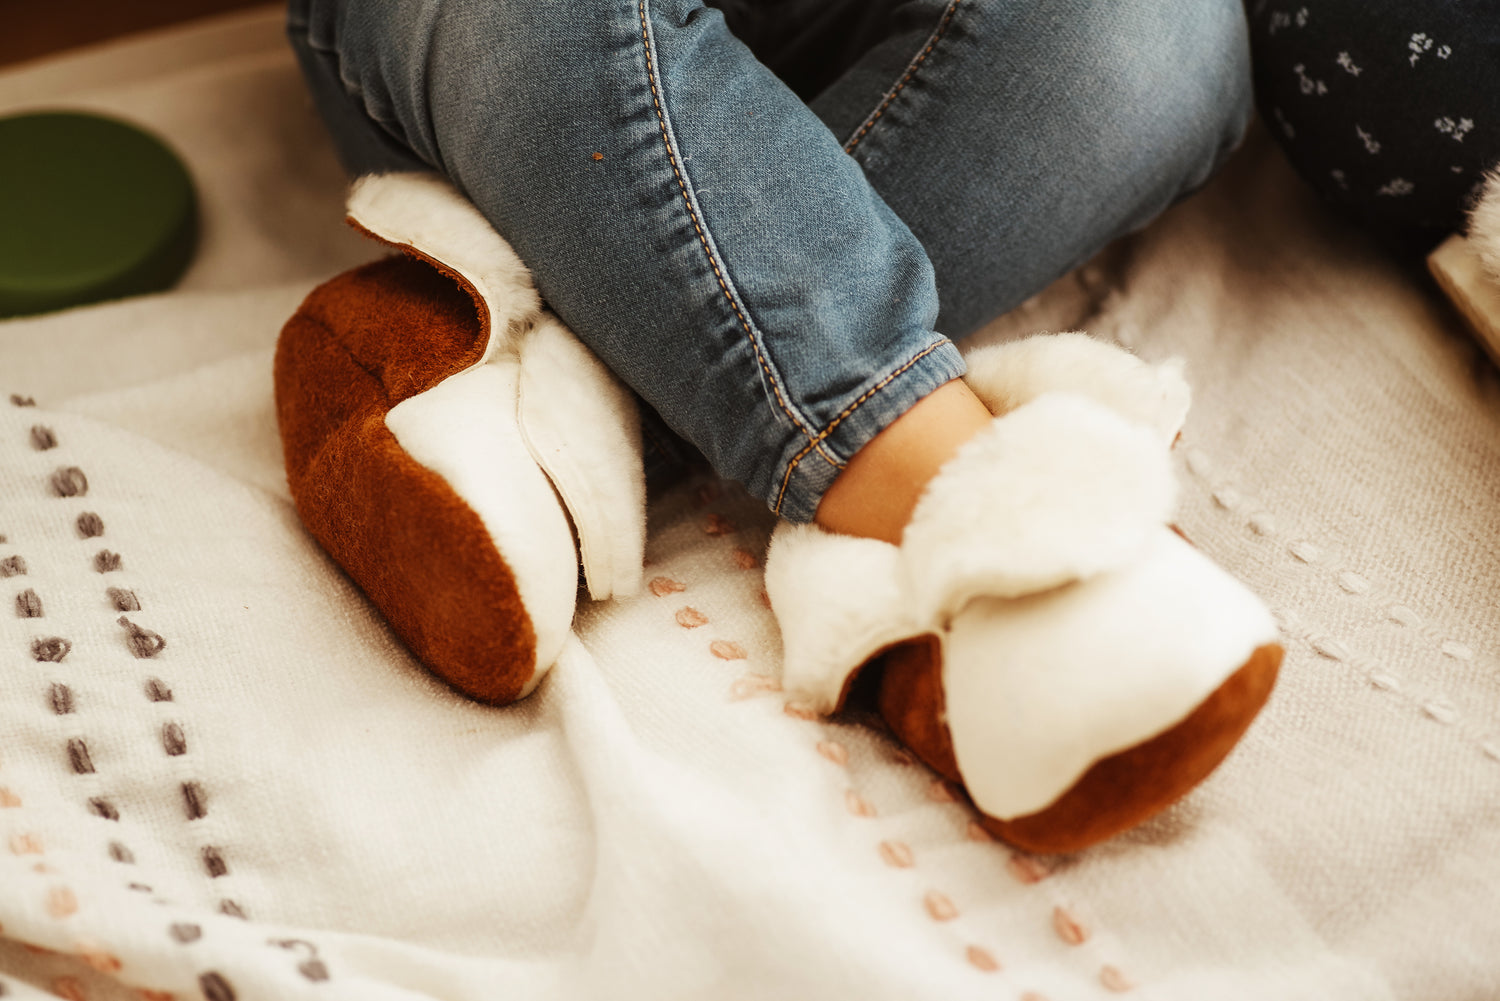 Baby and toddler merino sheepskin slippers with a suede leather cover